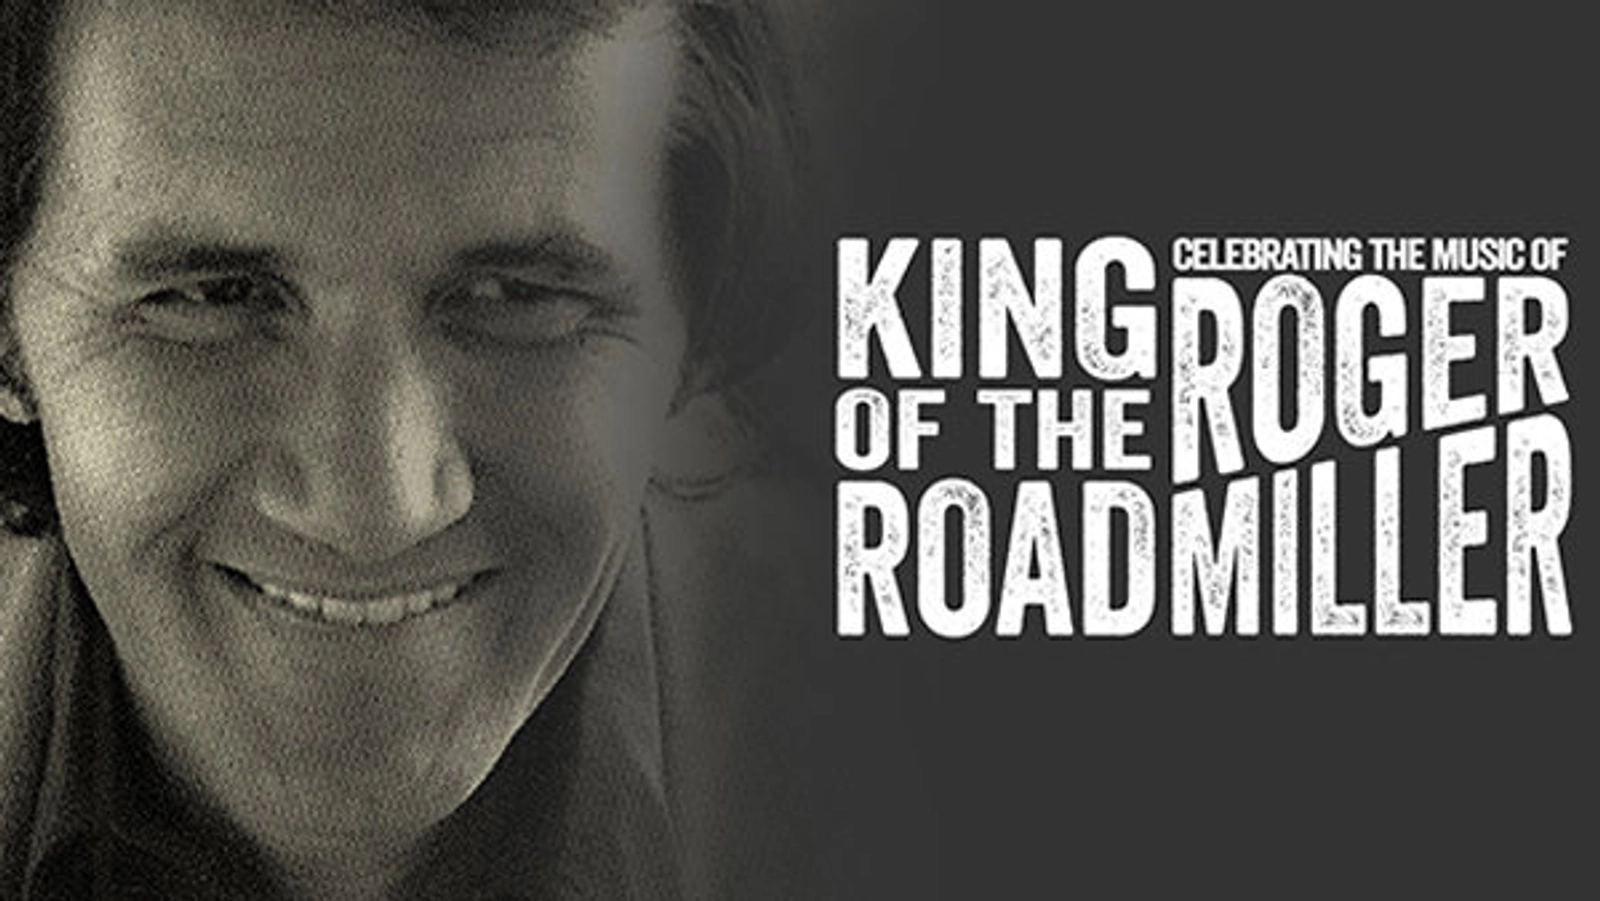 King of the Road: Celebrating The Music of Roger Miller - Thumbnail Image